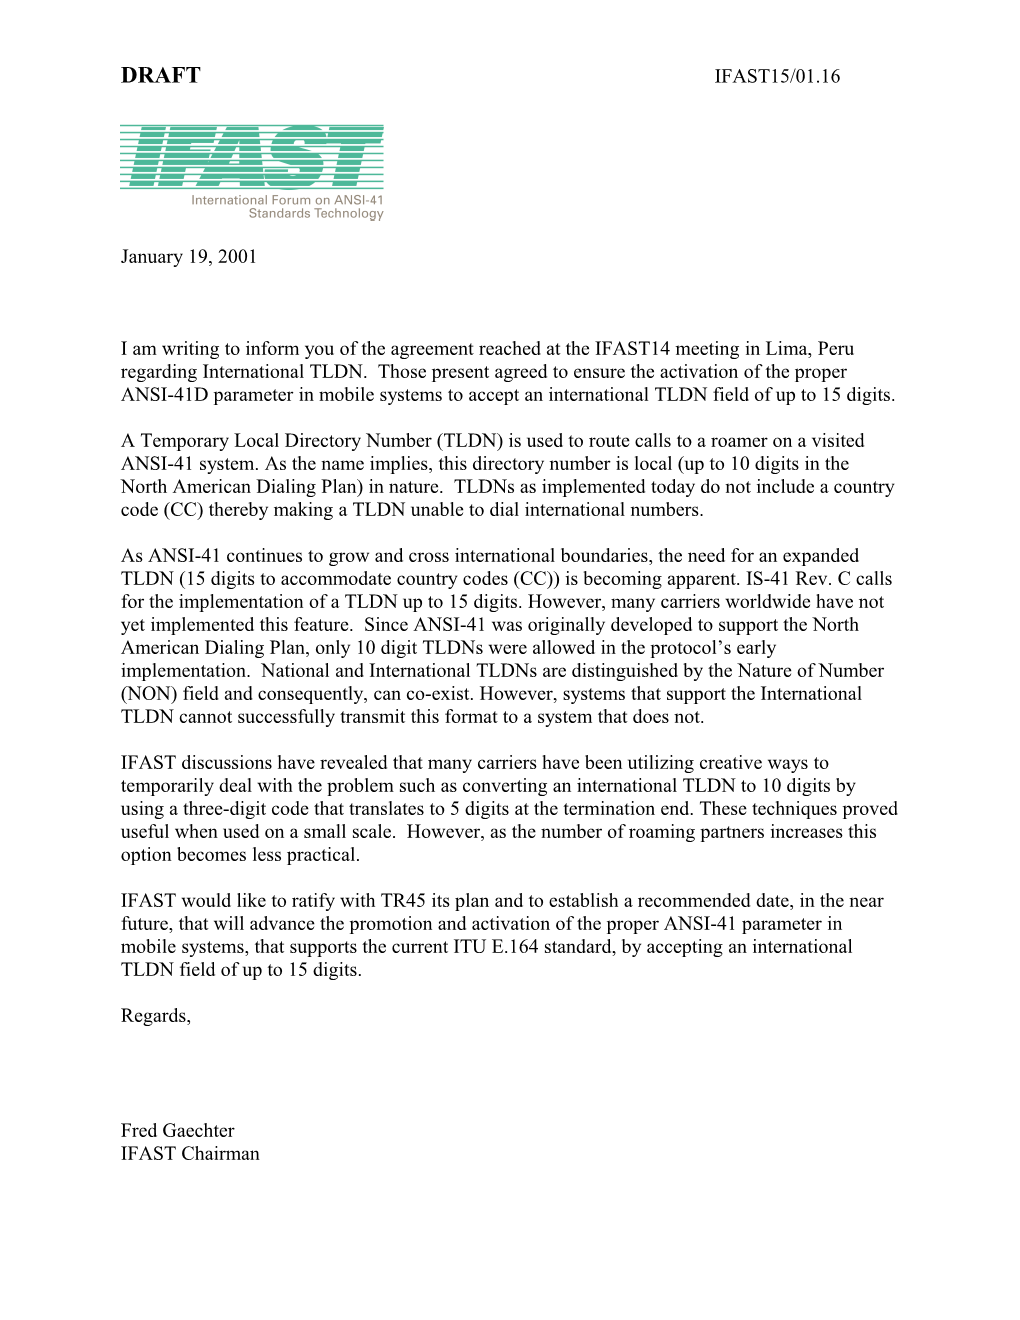 I Am Writing to Inform You of the Agreement Reached at the IFAST14 Meeting in Lima, Peru